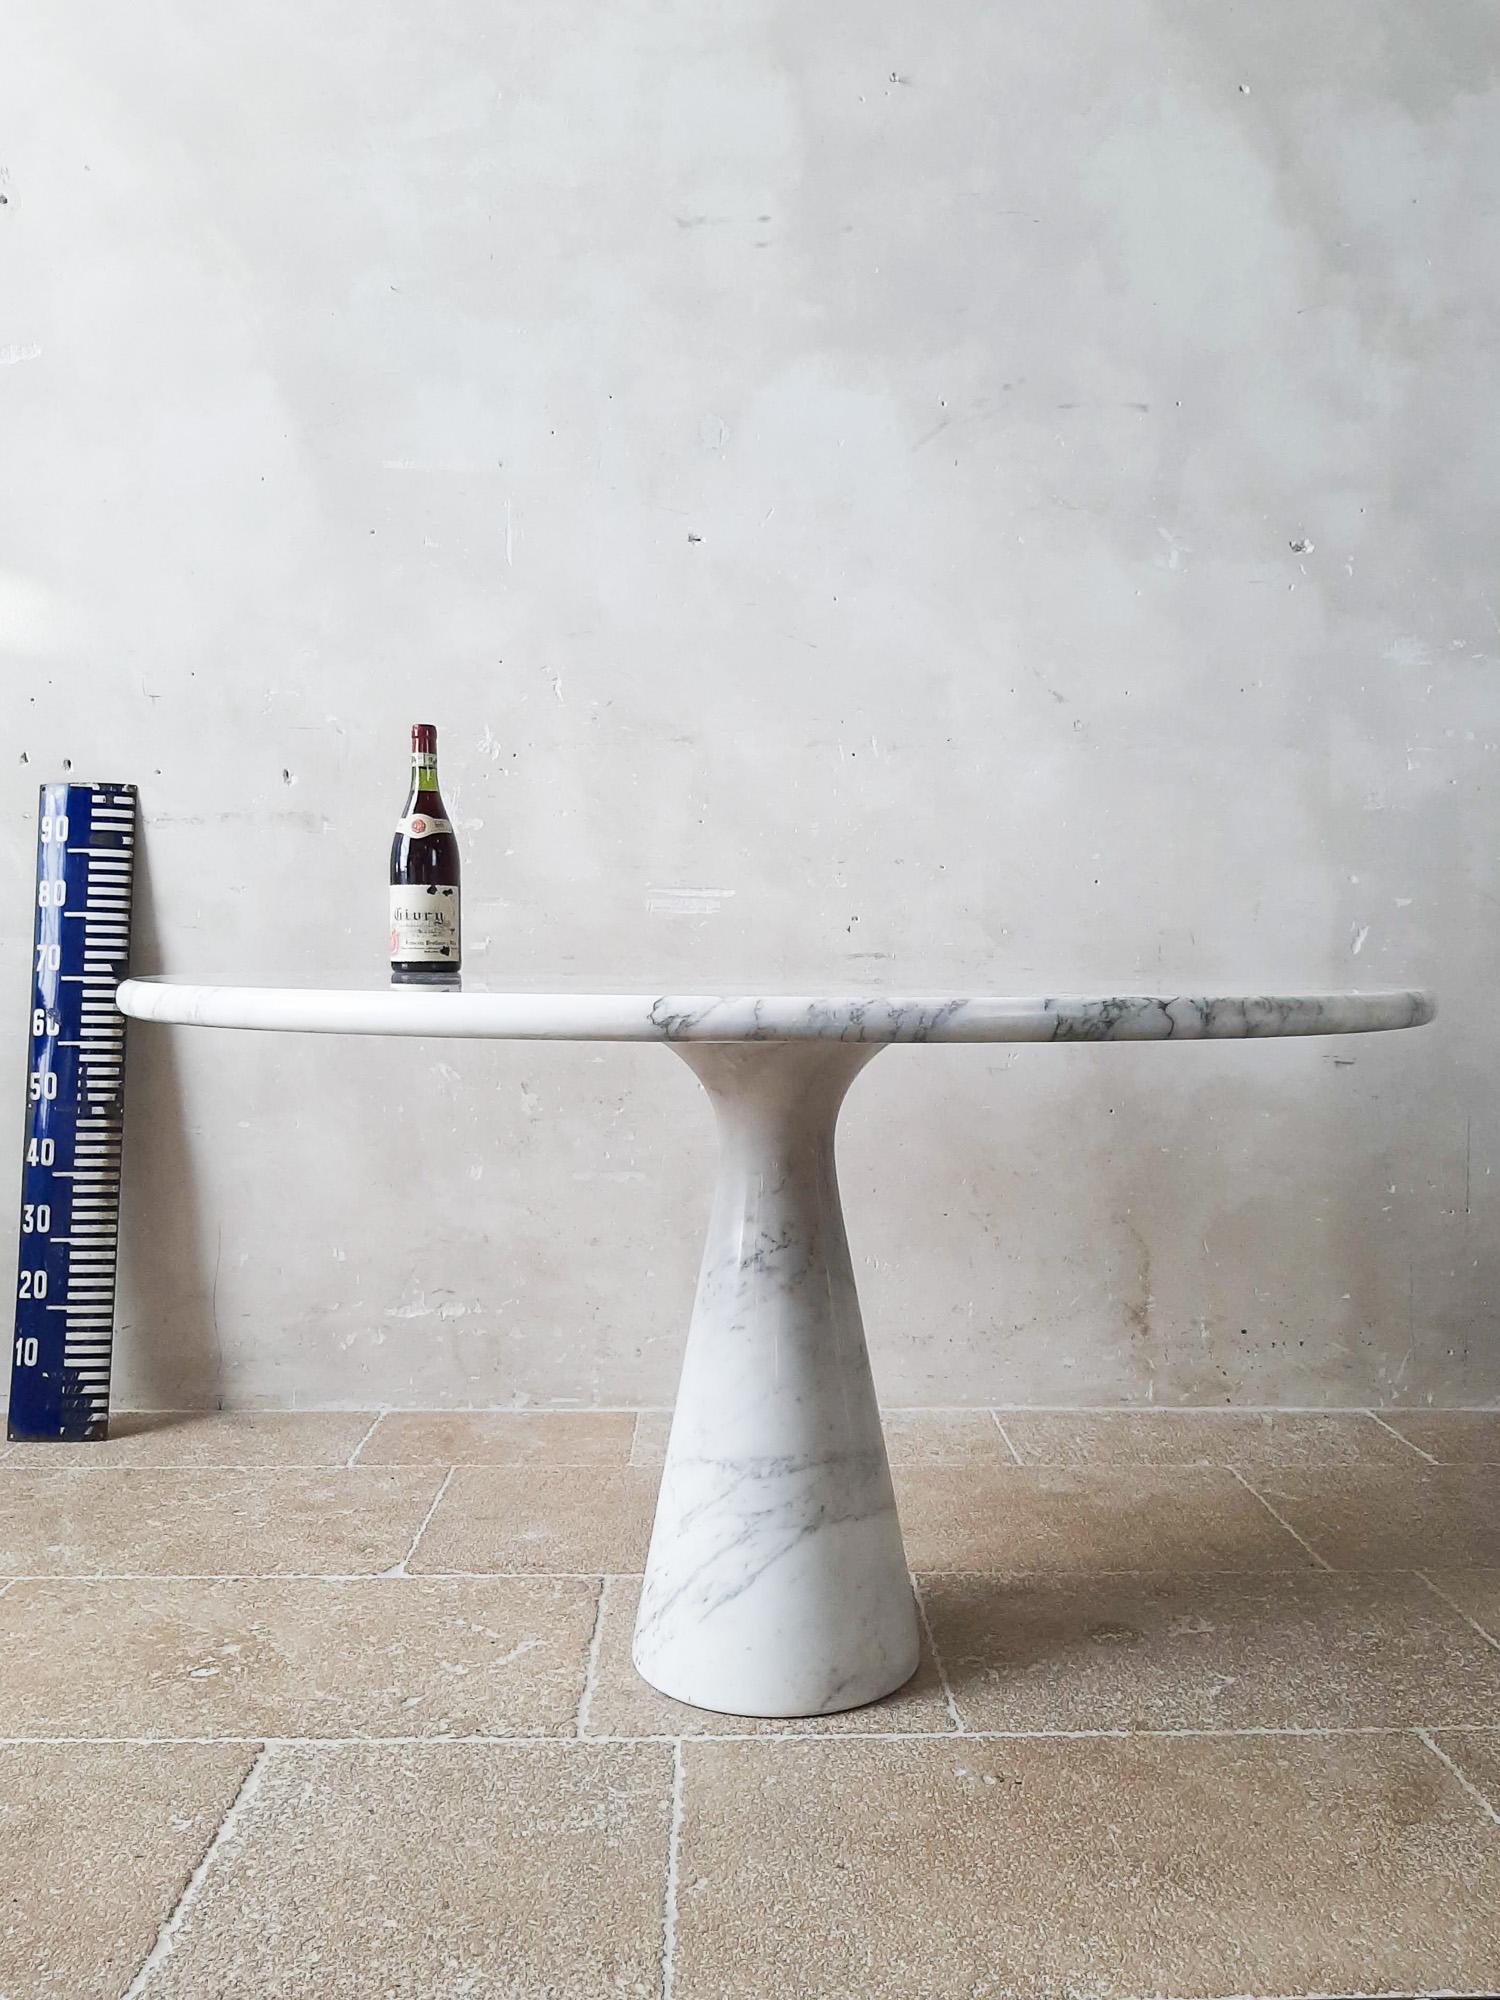 Original Angelo Mangiarotti round marble dining table, Italy, 1970s. 
This stylish Italian designer table is made of solid white Arabescato marble.

Measures: Diameter 130 cm, Height 71 cm.